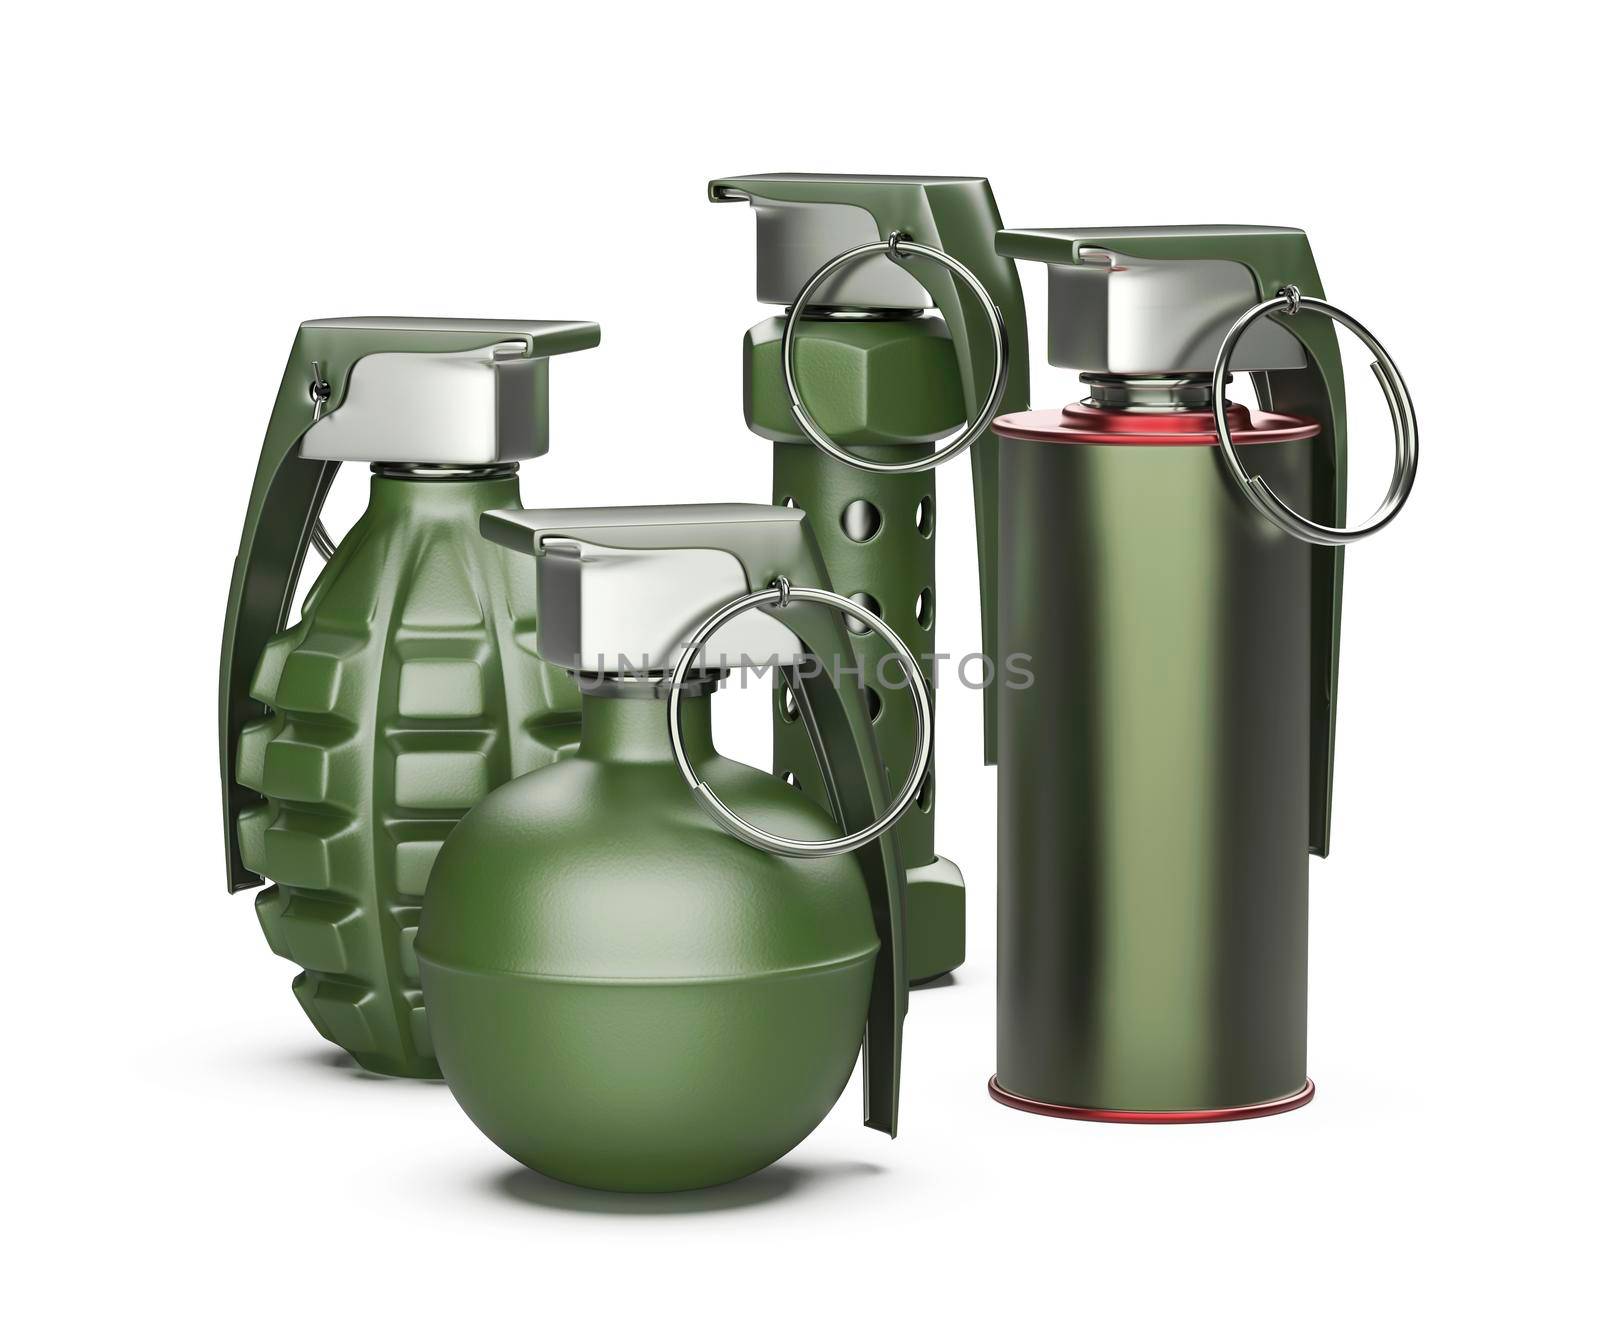 Four hand grenades by magraphics